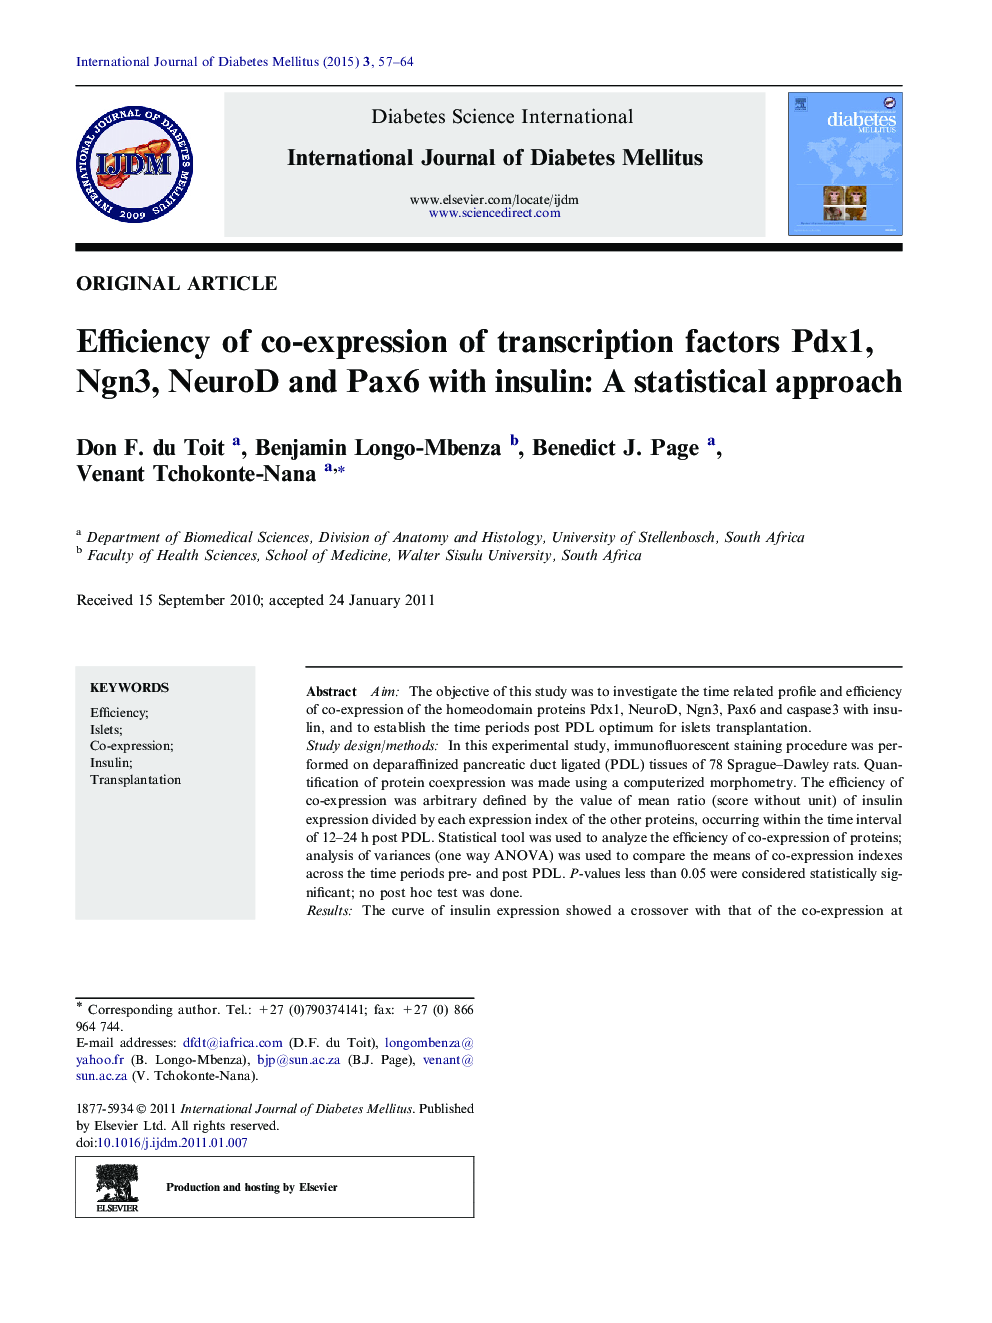 Efficiency of co-expression of transcription factors Pdx1, Ngn3, NeuroD and Pax6 with insulin: A statistical approach